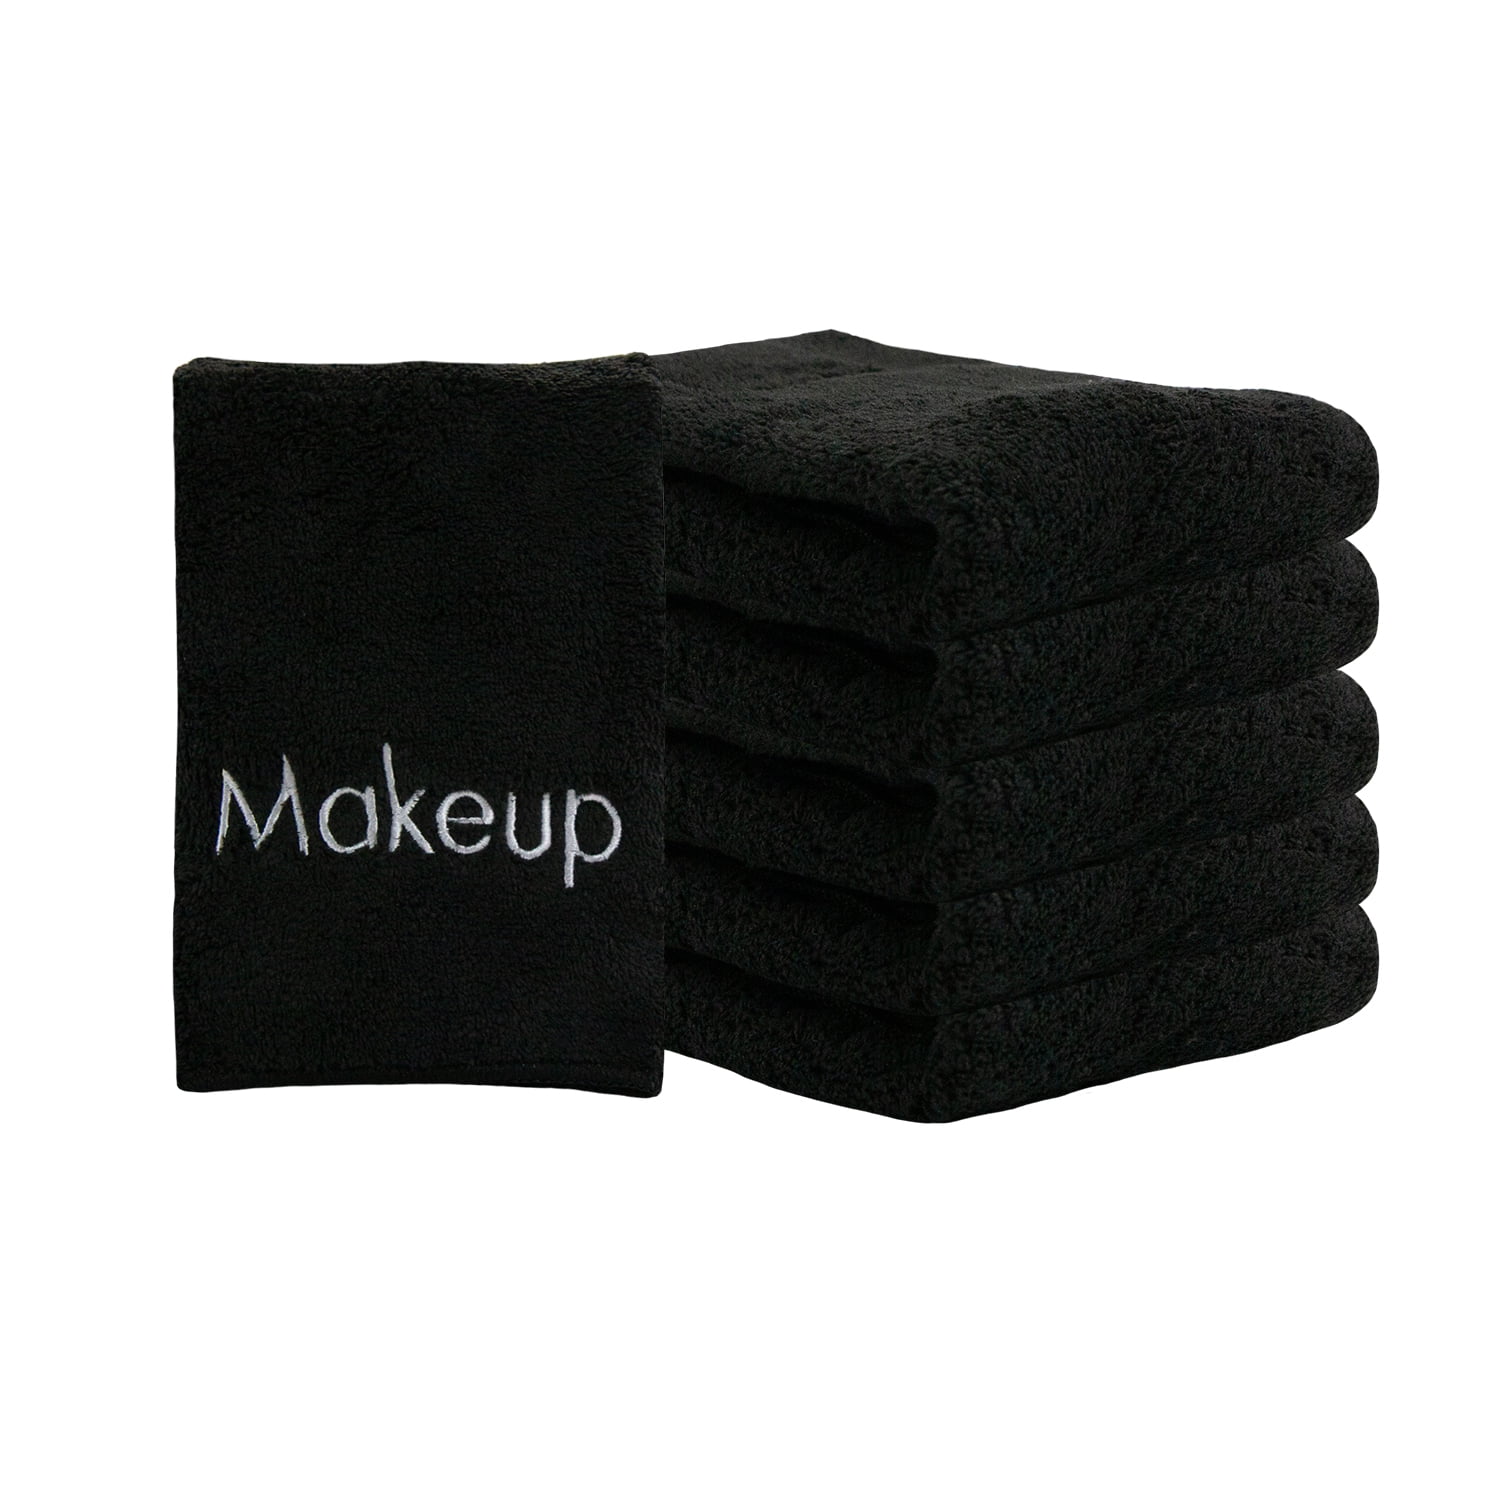 6 Pack of Makeup Towels Soft Microfiber 13x13 Washcloth Reusable Embroidered 